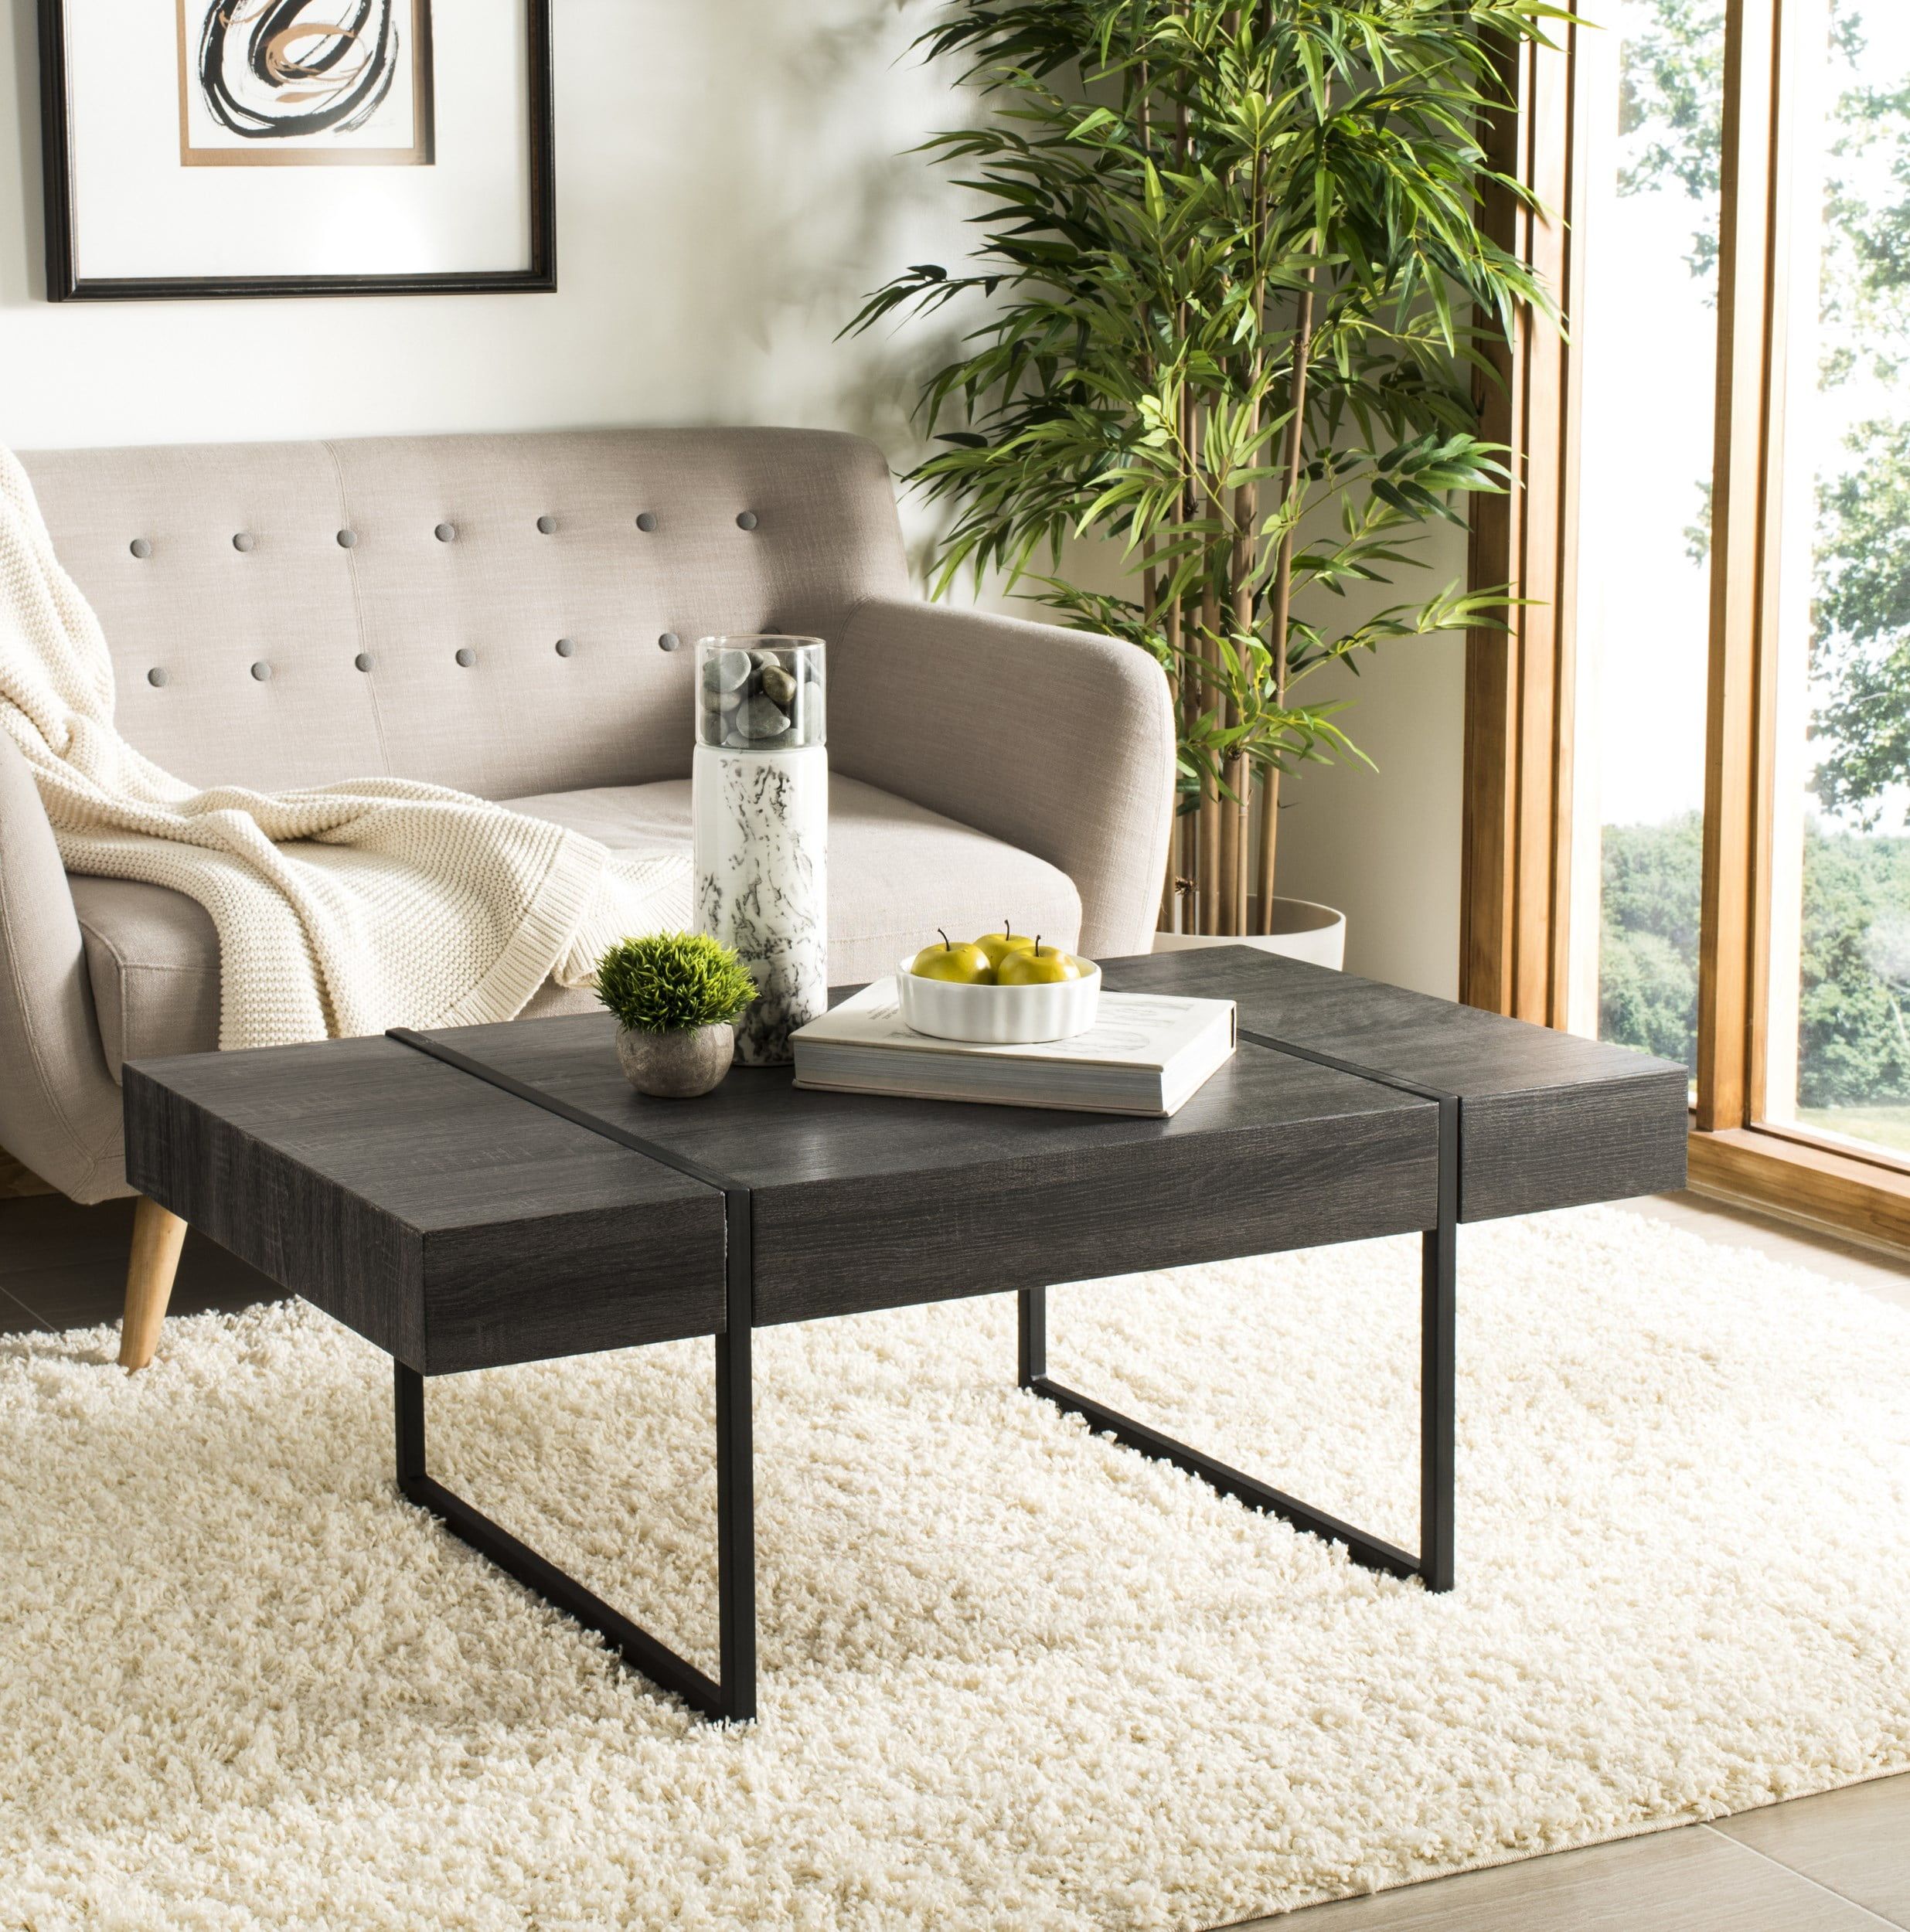 Safavieh Tristan Rectangular Modern Coffee Table, Black – Walmart Pertaining To Coffee Tables For 4 6 People (Photo 1 of 15)